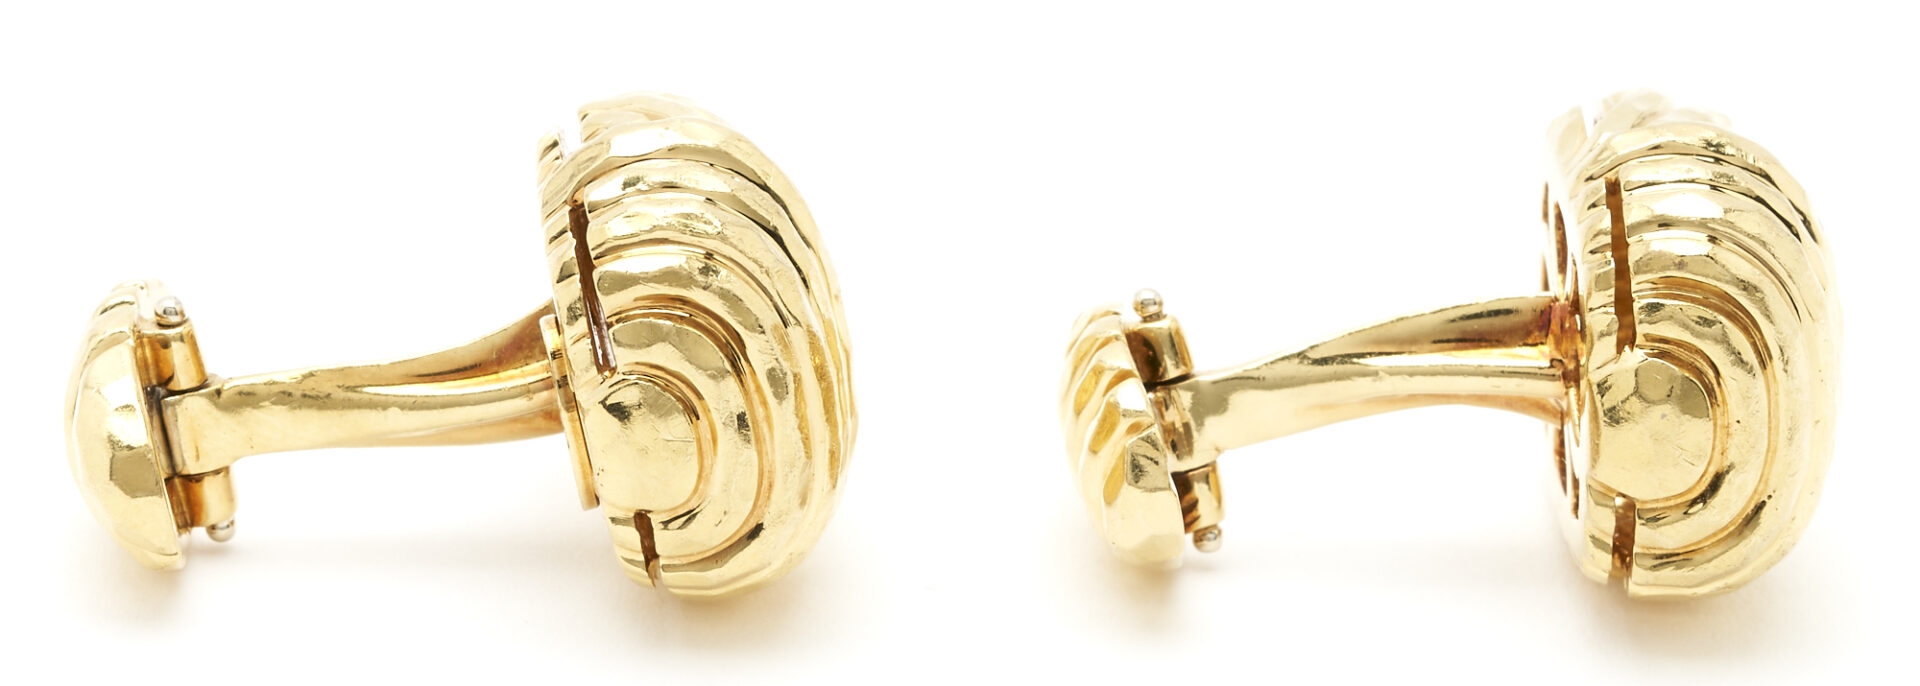 Lot 320: Pair of 18K Yellow Gold Cufflinks by Henry Dunay